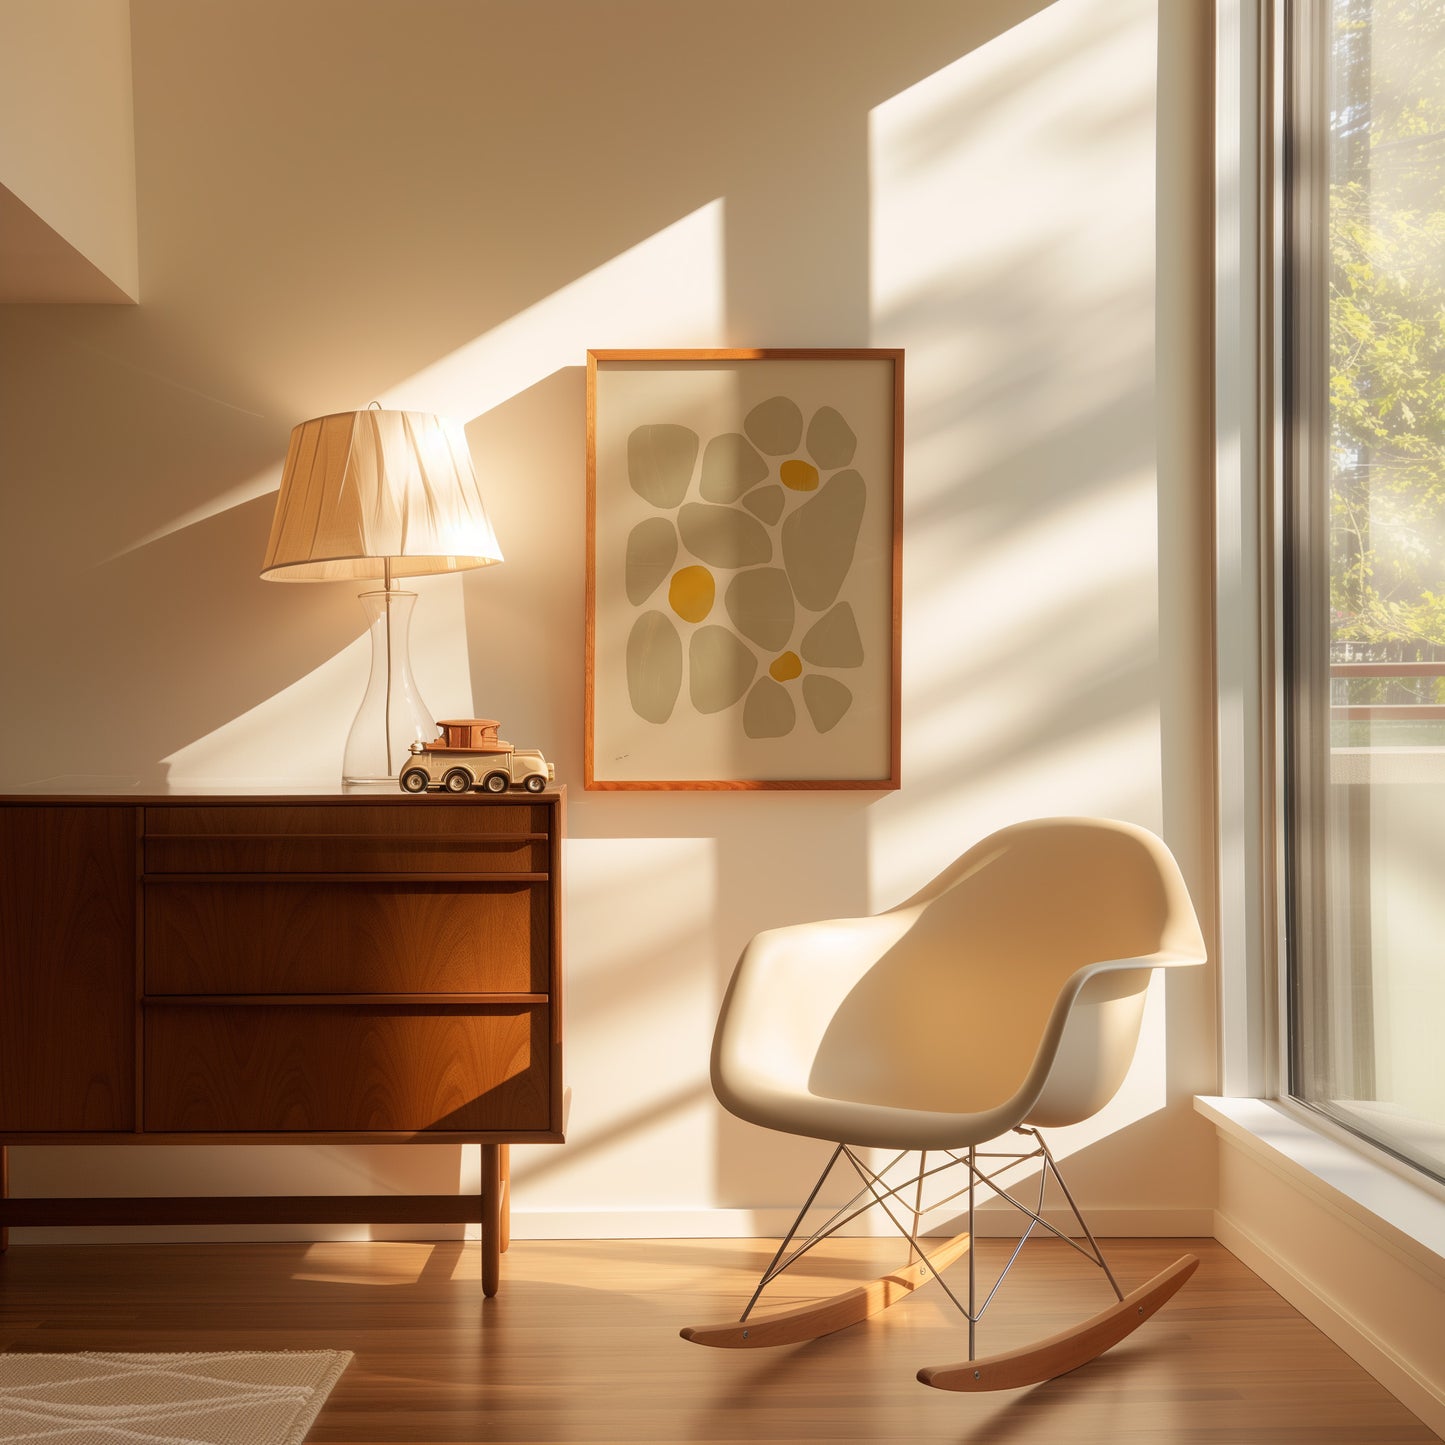 Cozy sunlit room with modern chair, wooden cabinet, lamp, and artwork.